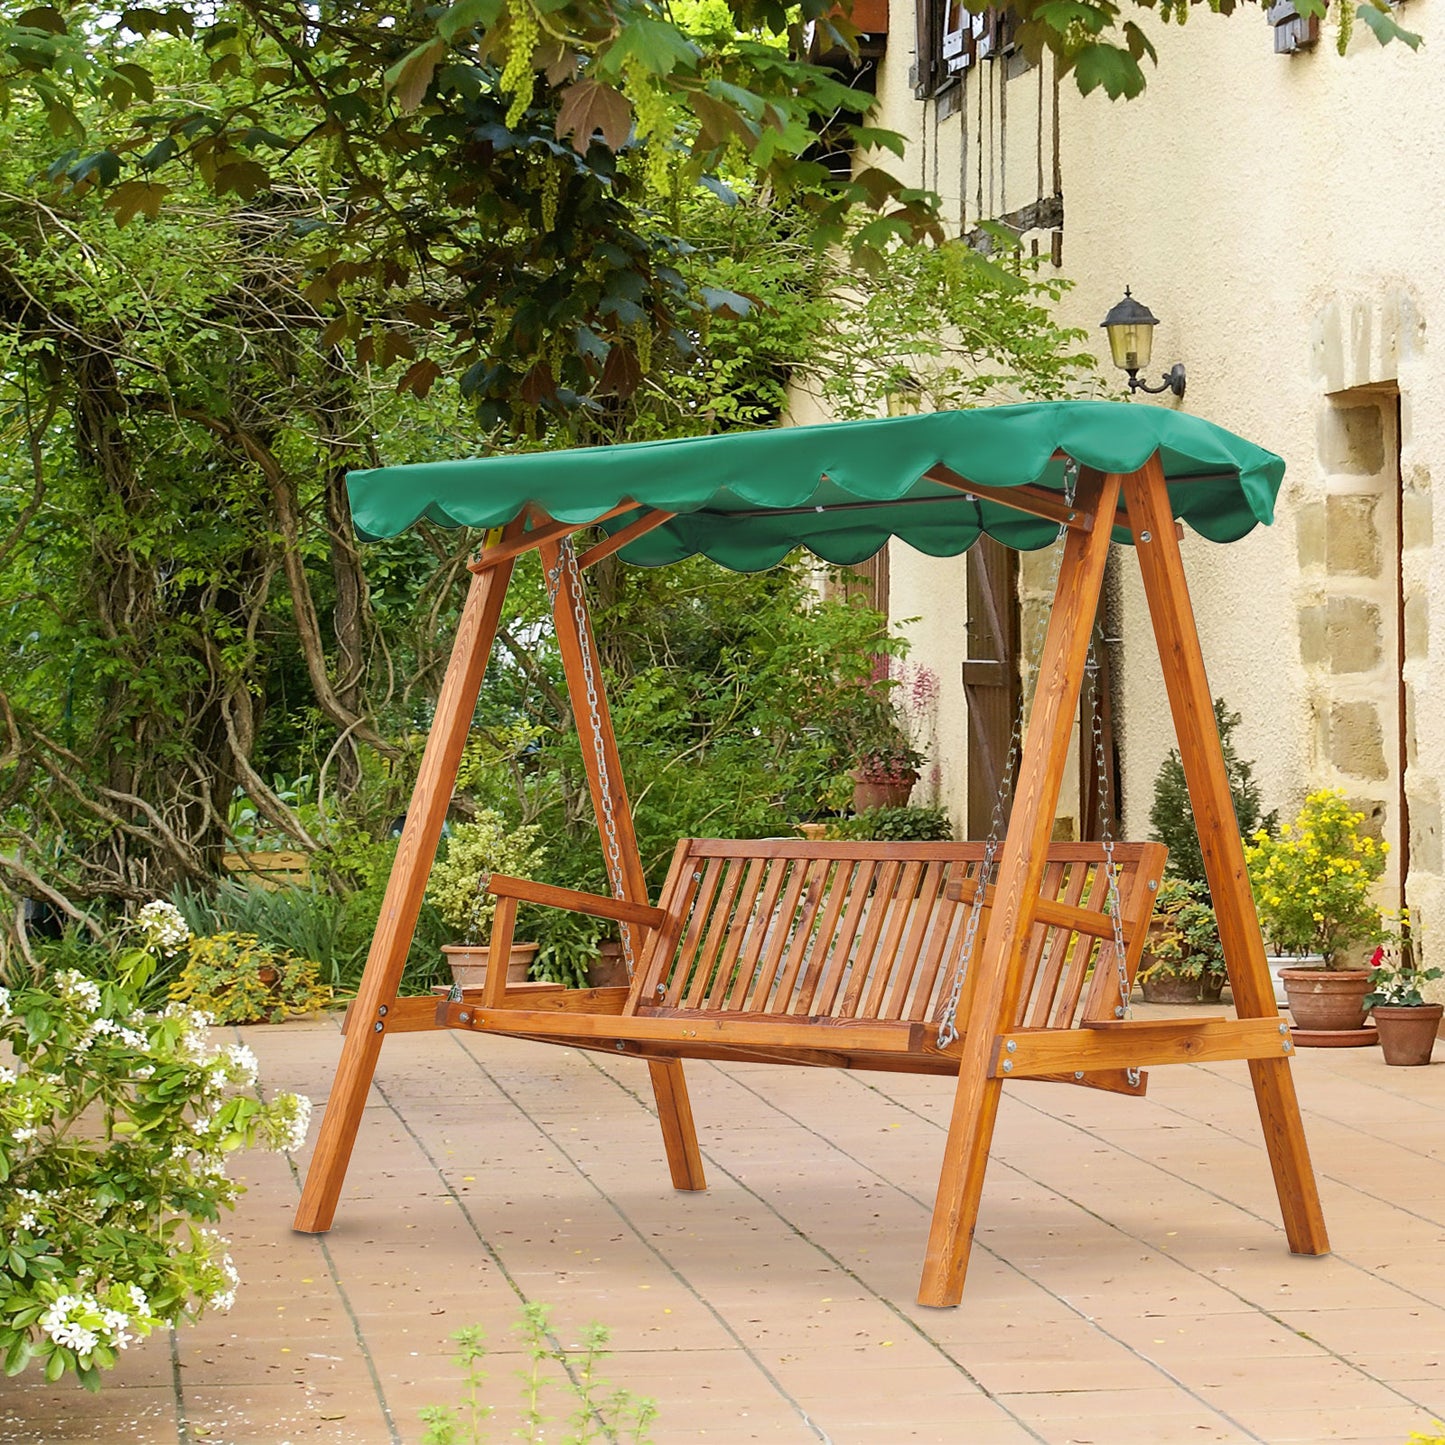 Outsunny Hardwood Swing Seat 3-Seater Pinewood Swing Chair Green Wooden Wood Garden Chair Seat Hammock Bench Furniture Lounger Bed